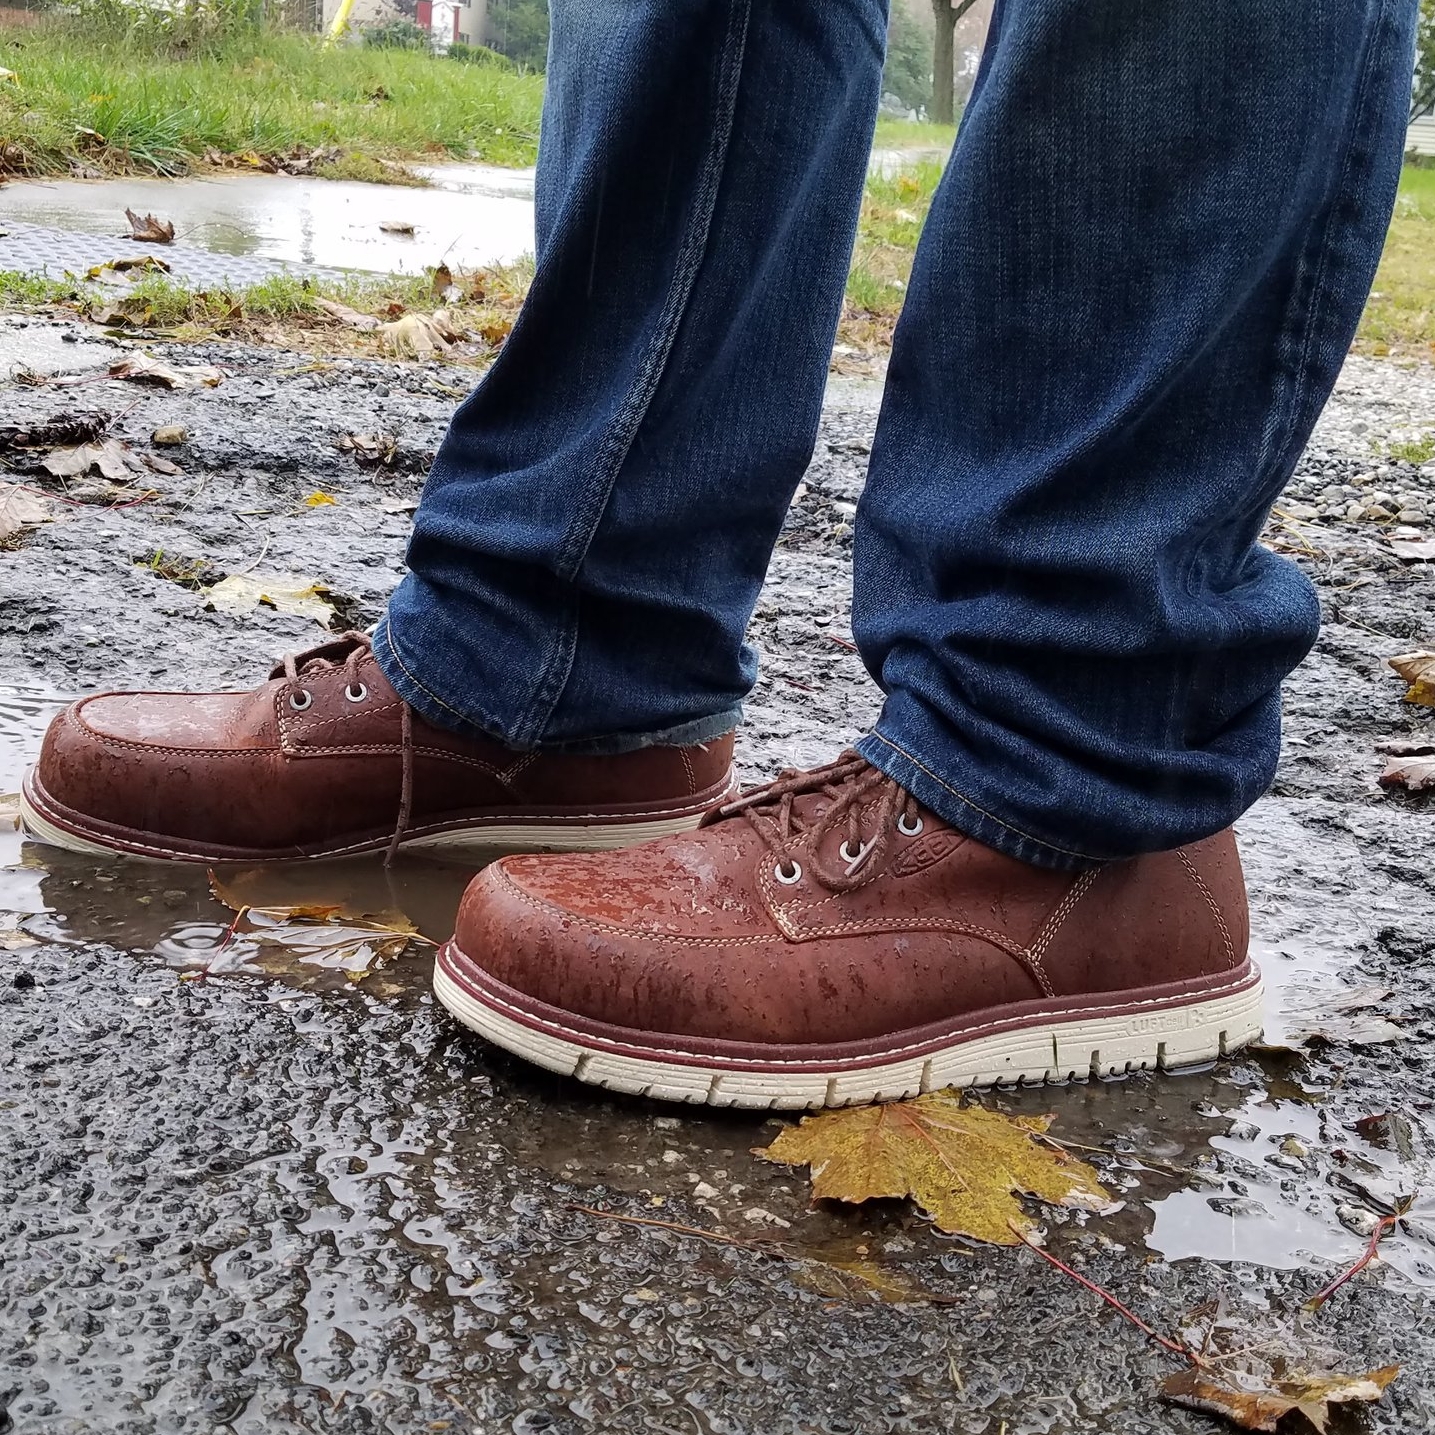 KEEN Utility Releases 2 New Styles of Work Boots That Keep You Looking ...